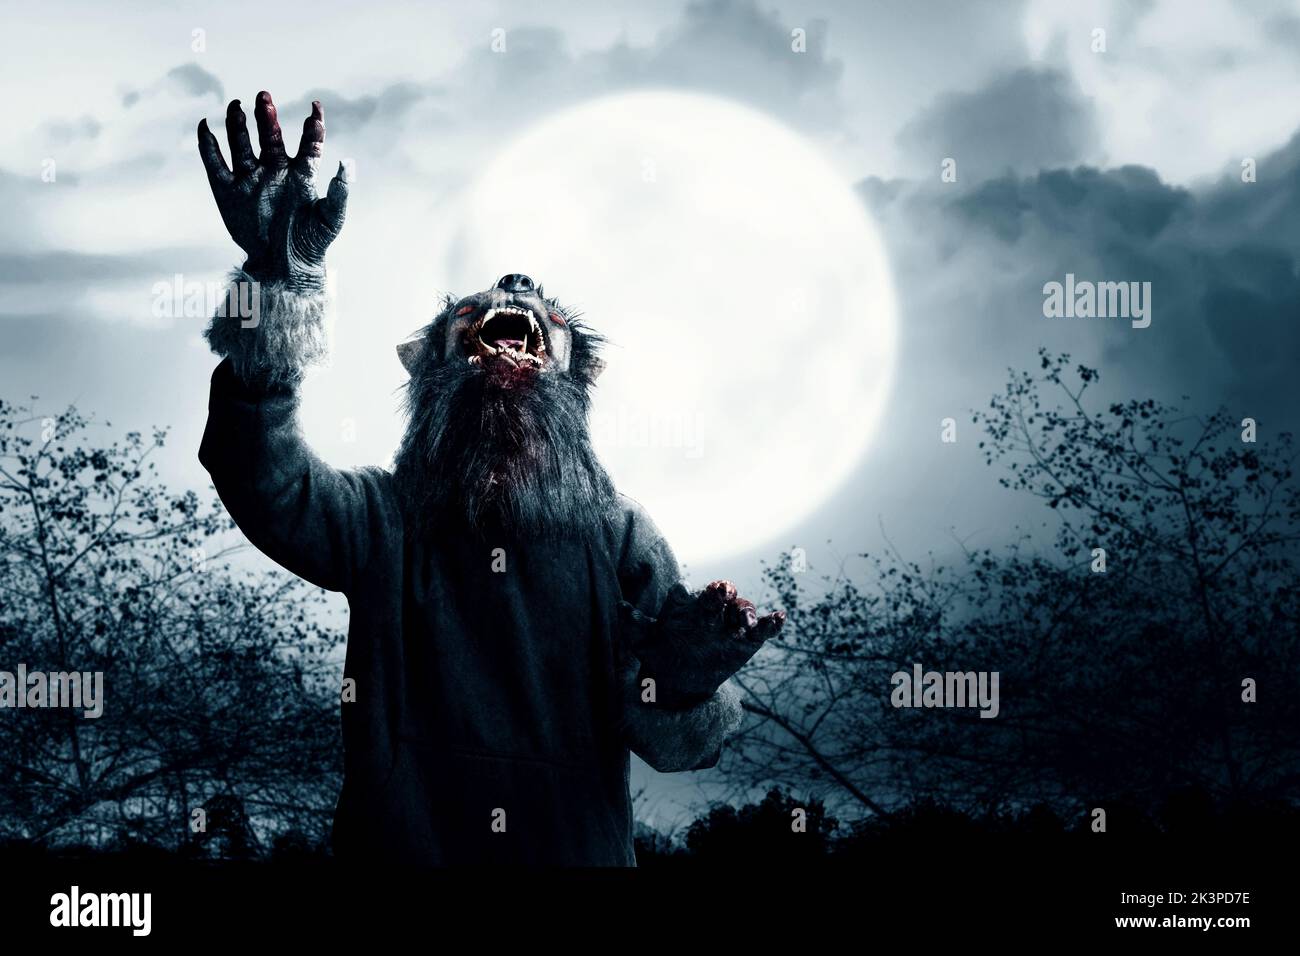 A werewolf with a full moon and night scene background. Halloween concept Stock Photo